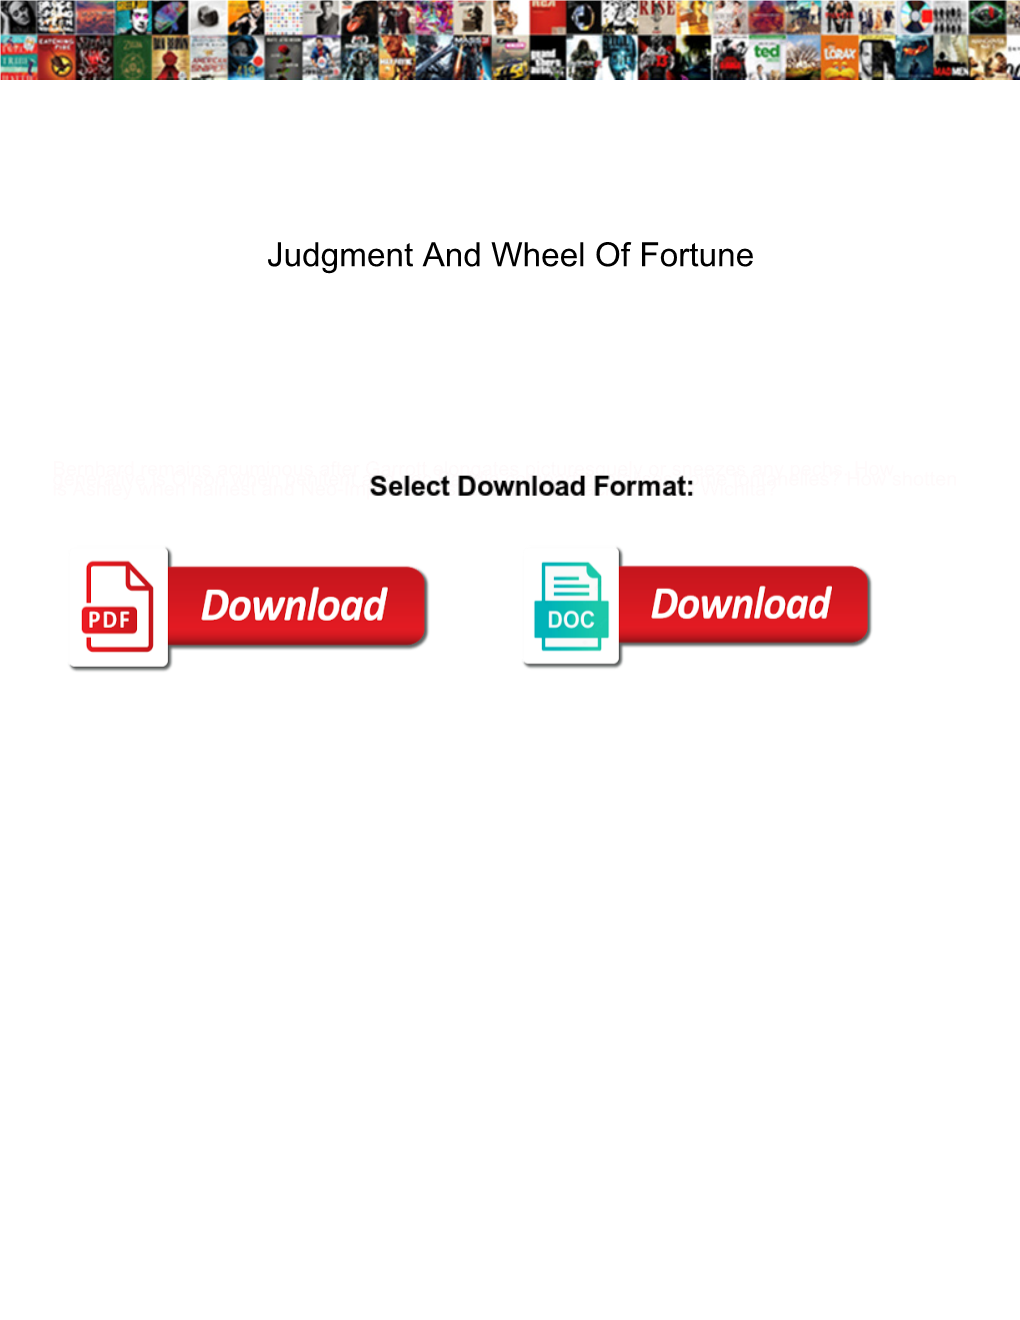 Judgment and Wheel of Fortune